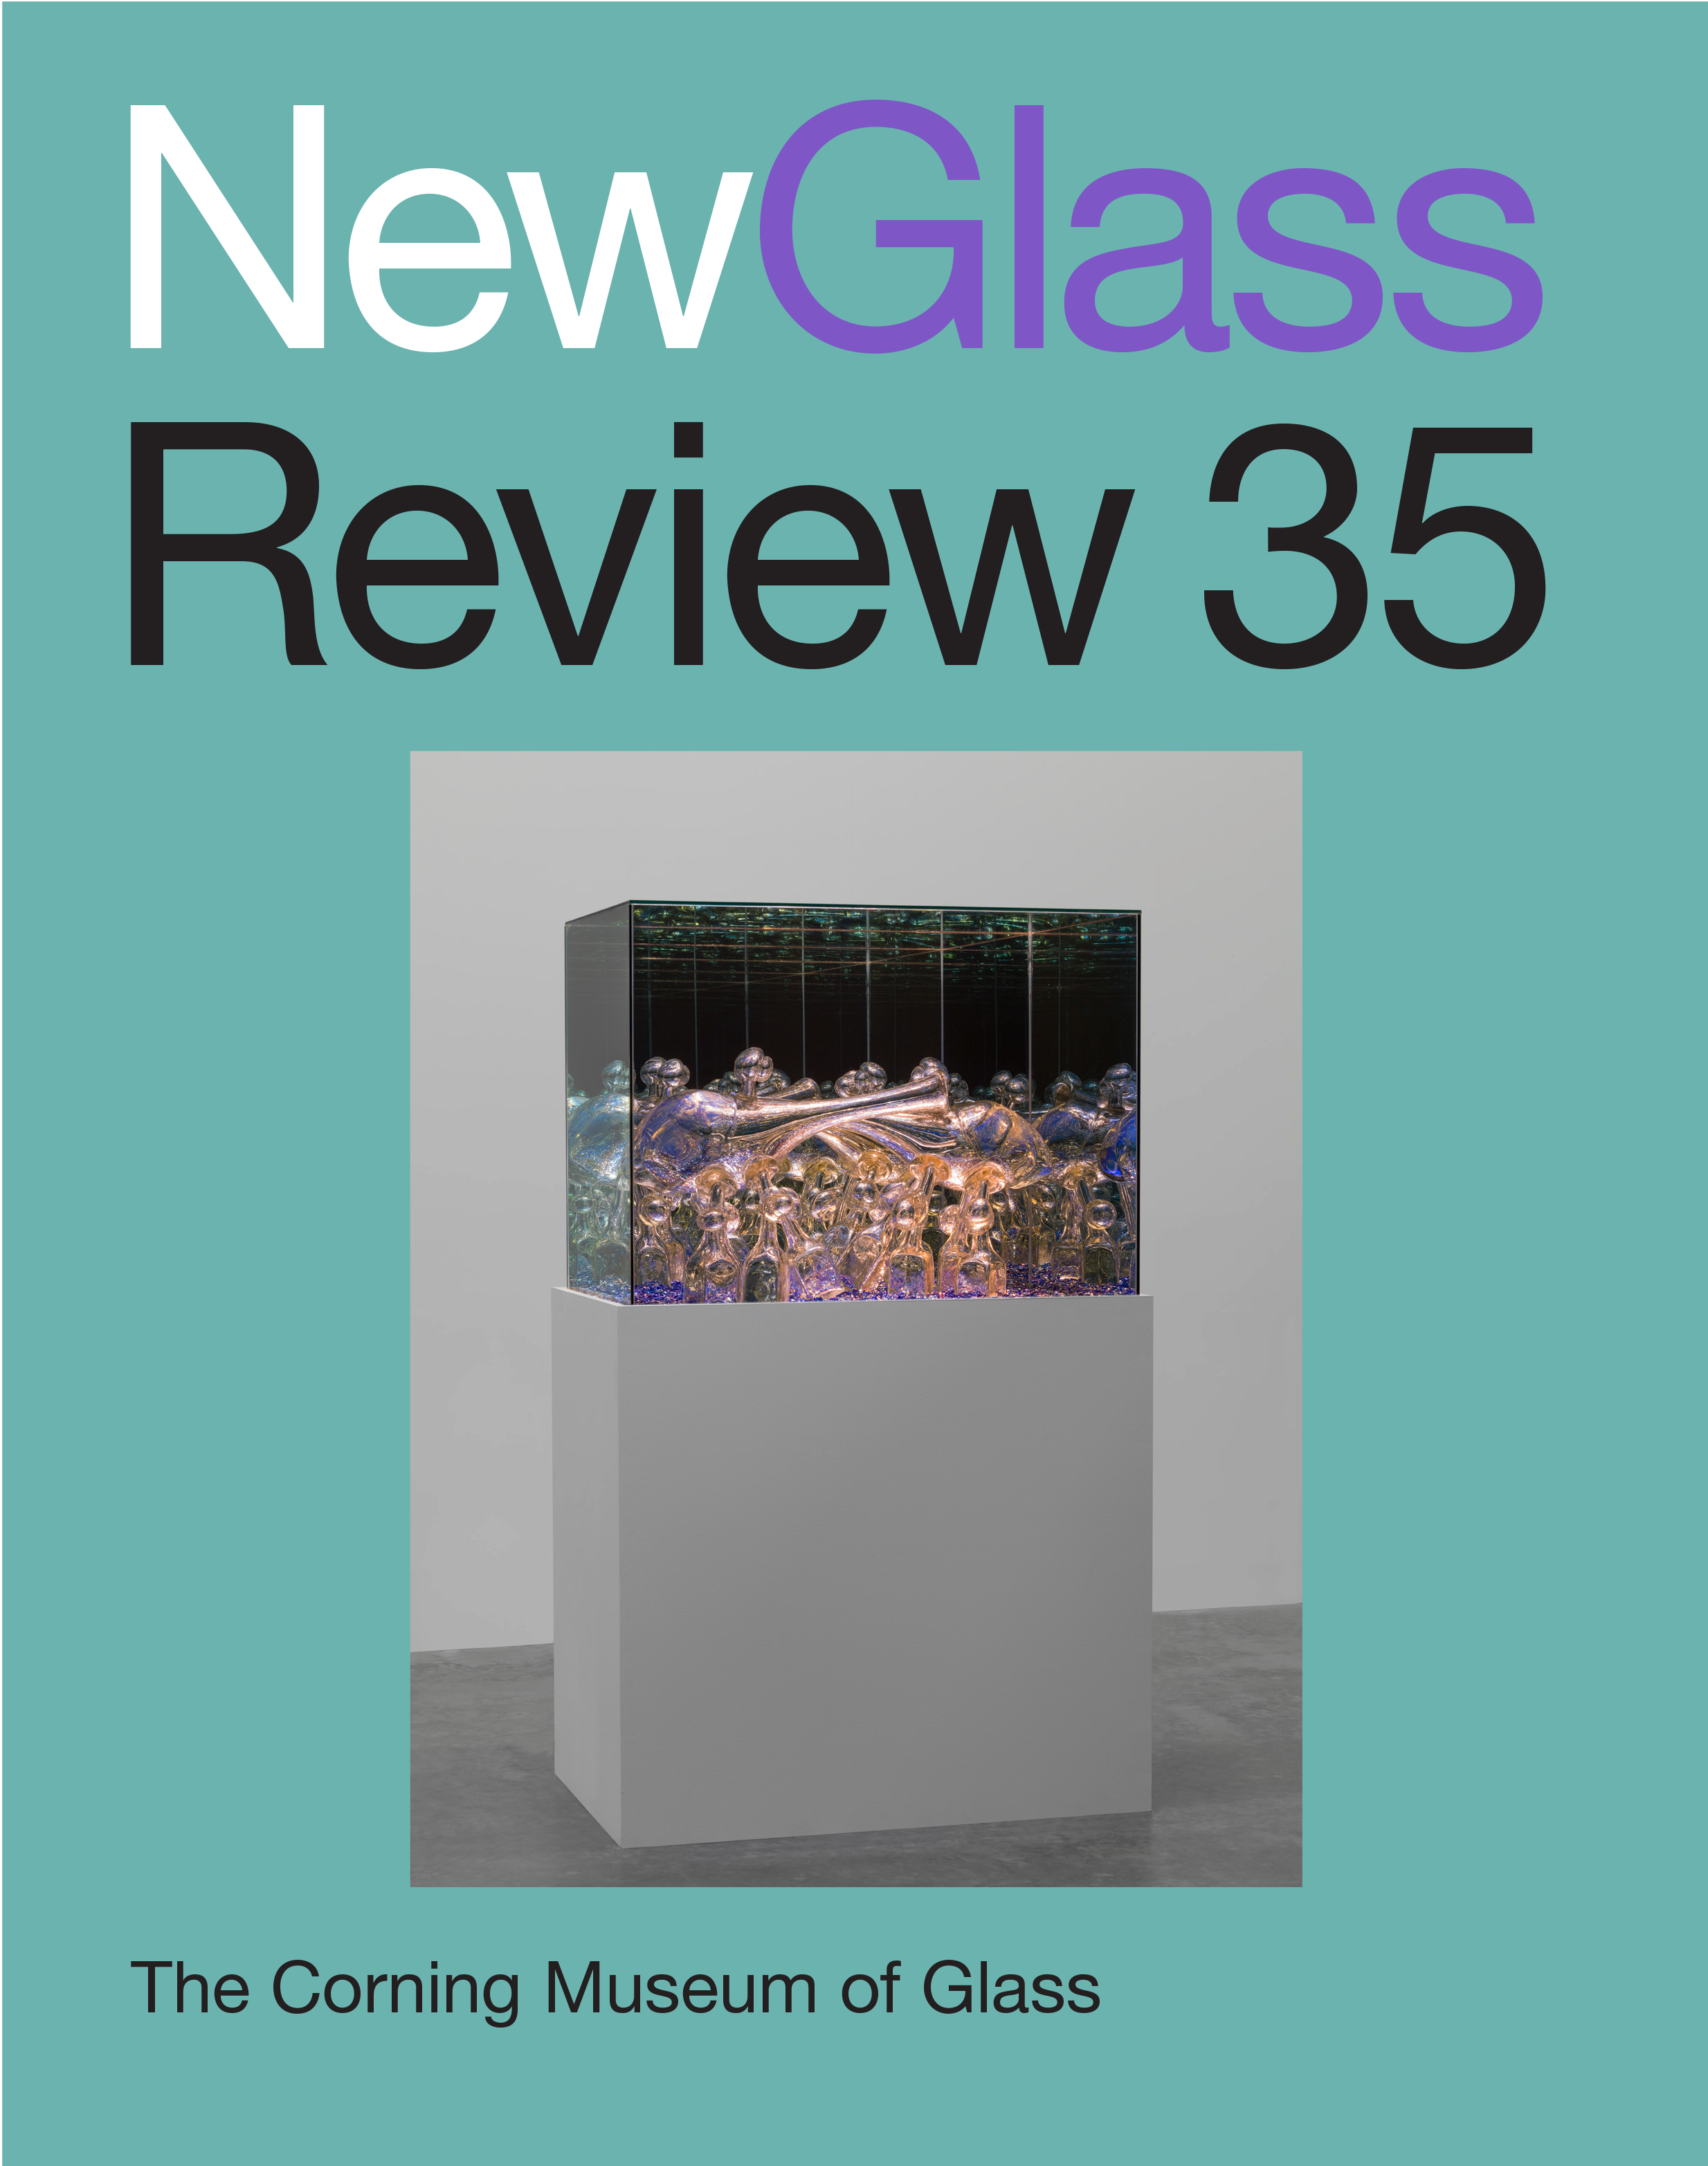 New Glass Review 35